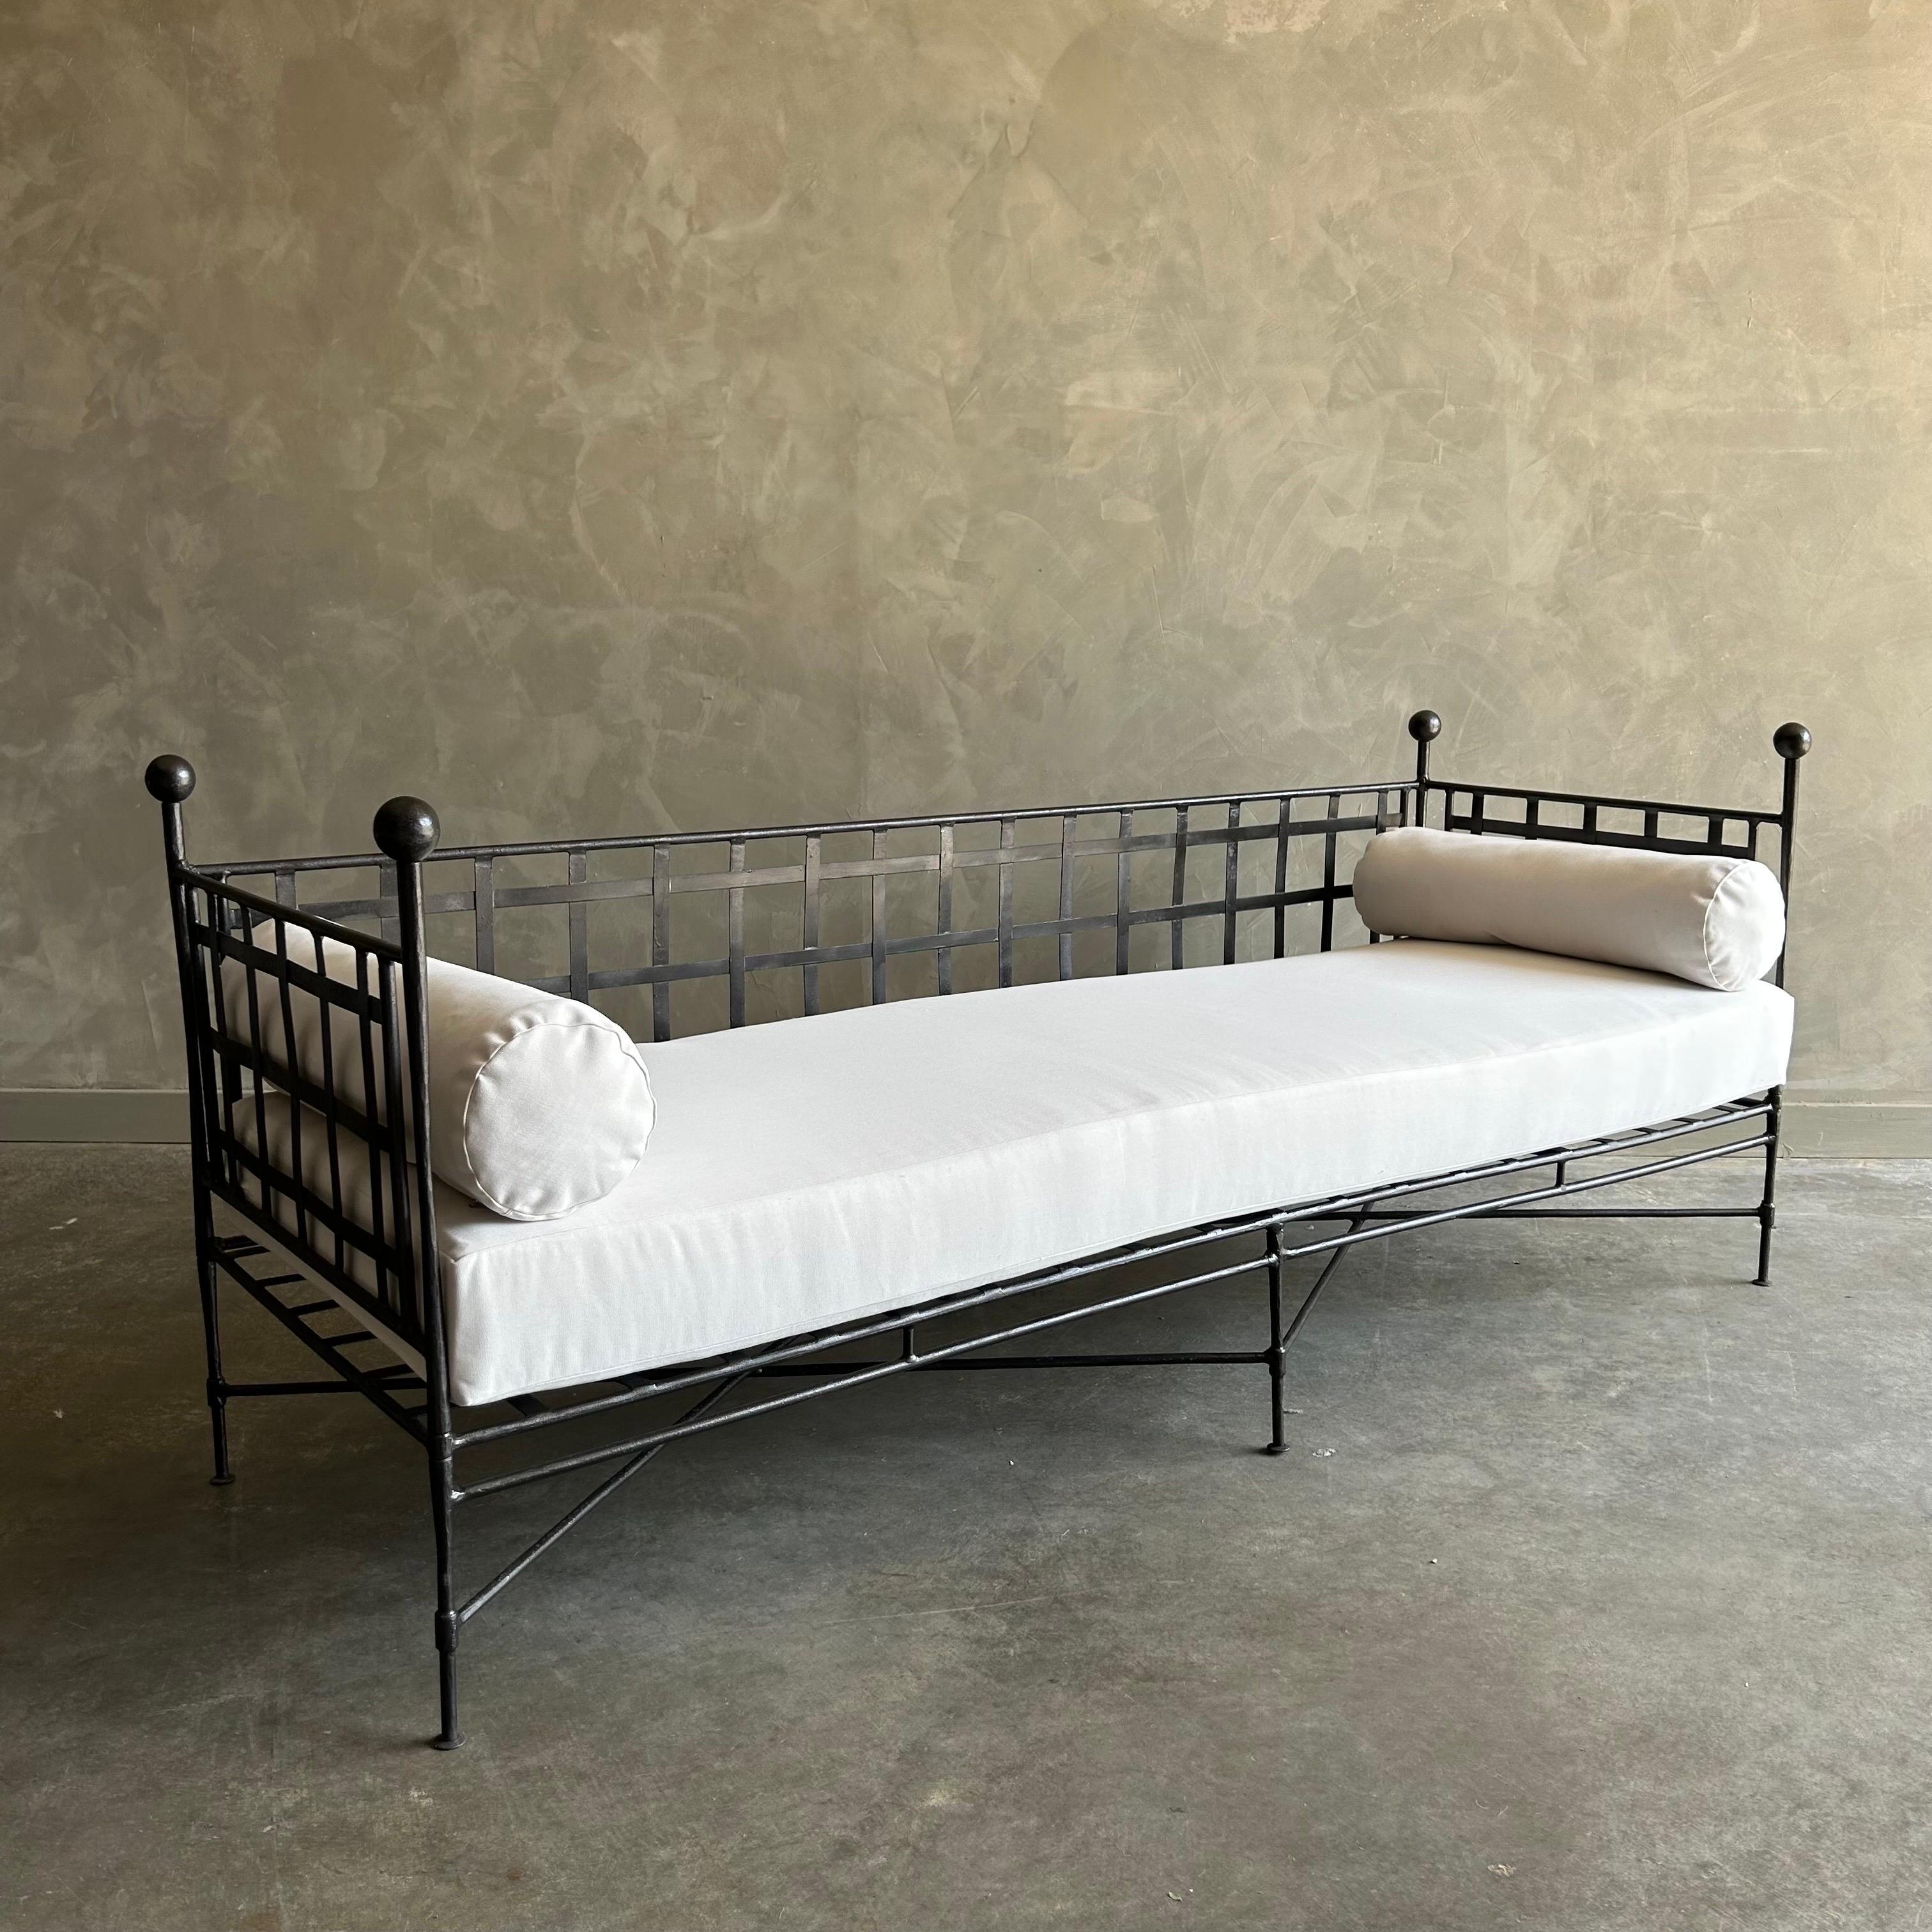 Custom Made to Order
Iron Sofa for Indoor or Outdoor
Size:  73”w x 25”d x 29”h  SH:16”. SD:24”
Can be made to your specifications. This collection also includes chairs, ottomans and coffee tables, made to order.
Each piece is hand crafted, and